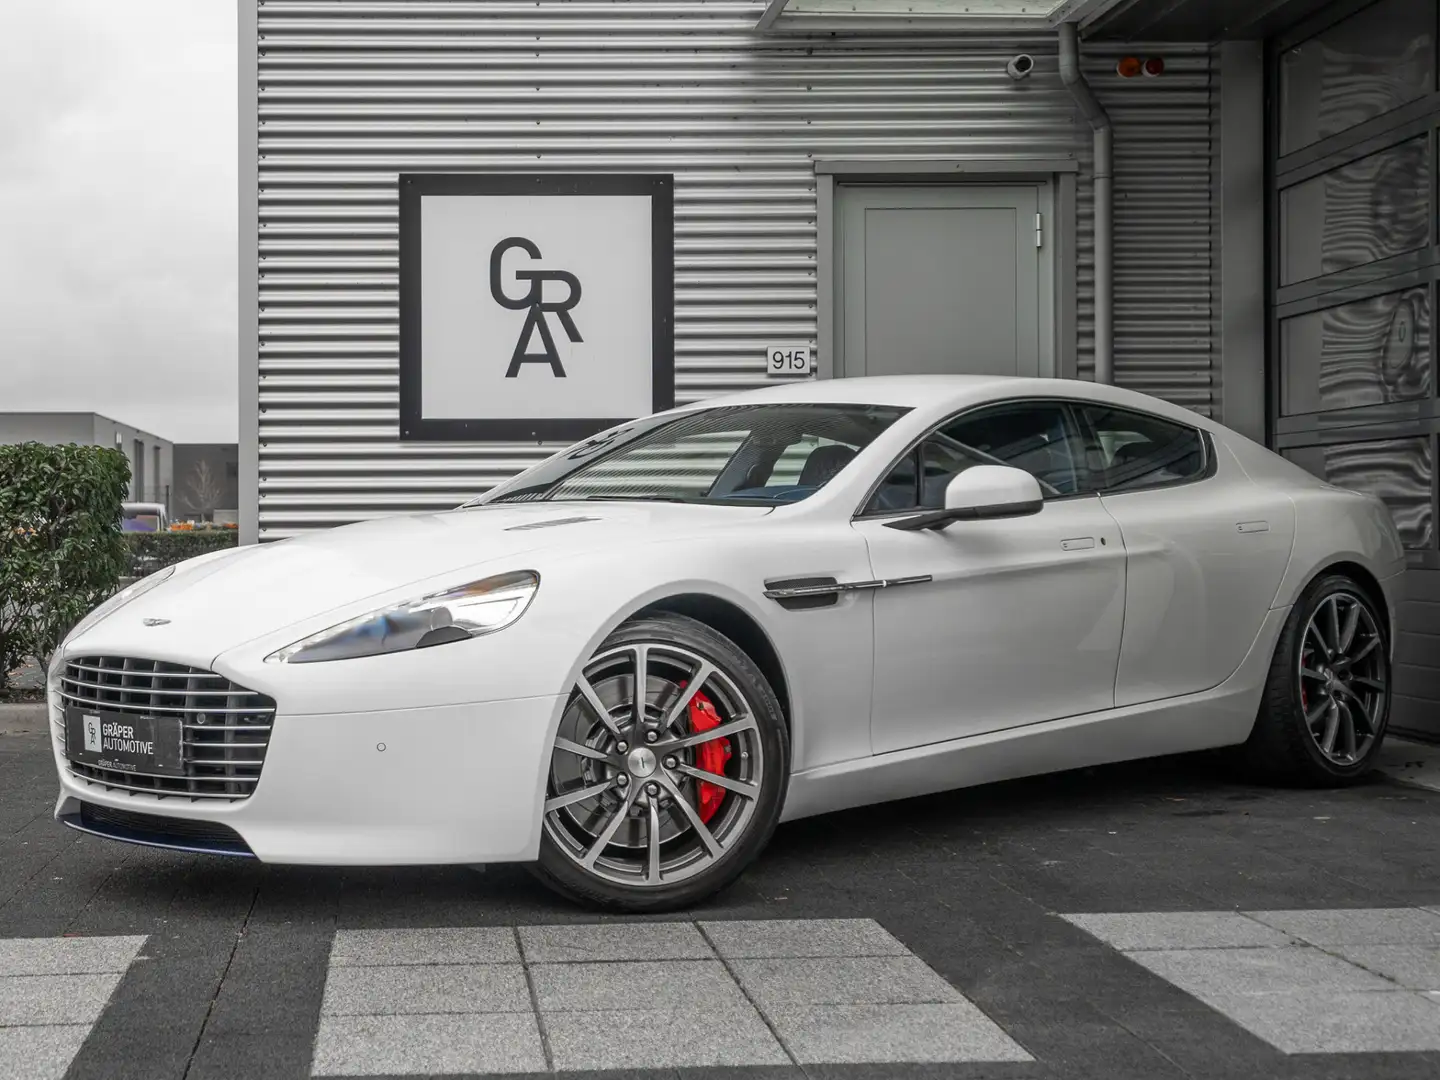 Aston Martin Rapide S 6.0 V12 ‘Britain is Great’ Edition by Q 1/8 Wit - 2